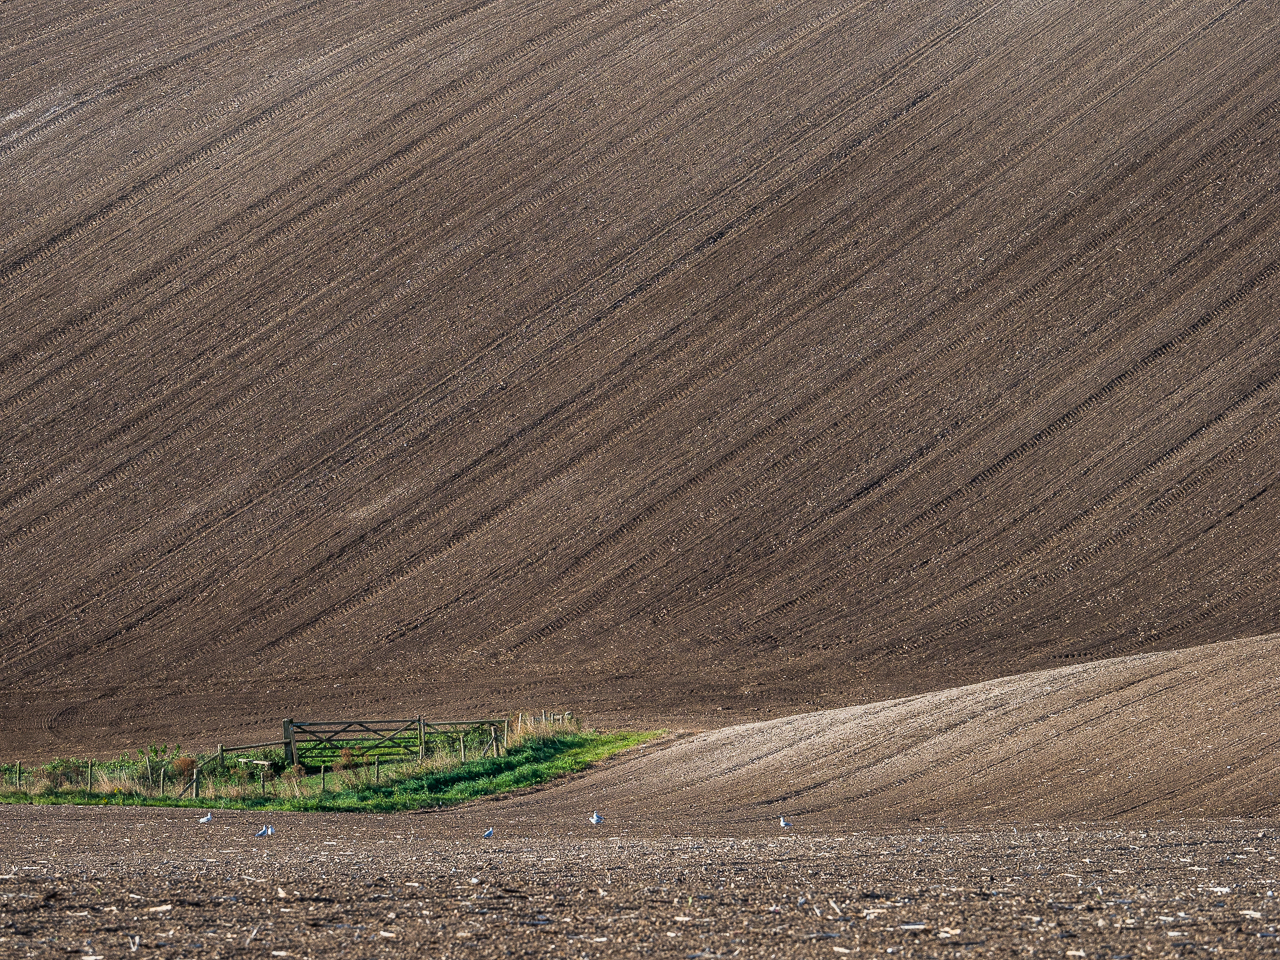 Travel photography England: Ploughed soil fields near Firle Beacon, a hill on the South Downs Way, East Sussex, England.